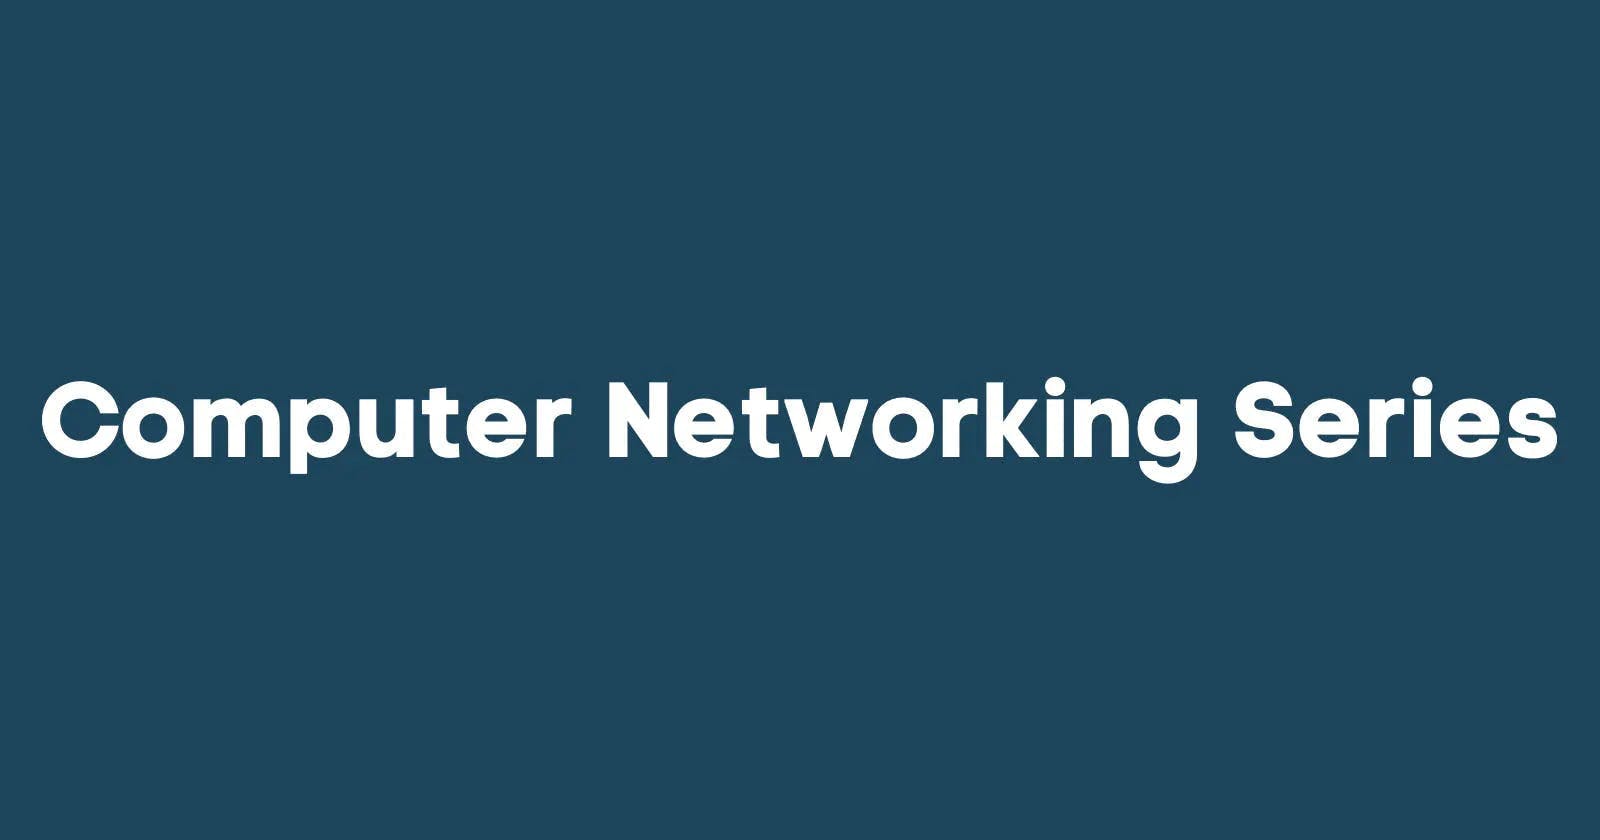 Introduction to Topologies & networking models in computer networking